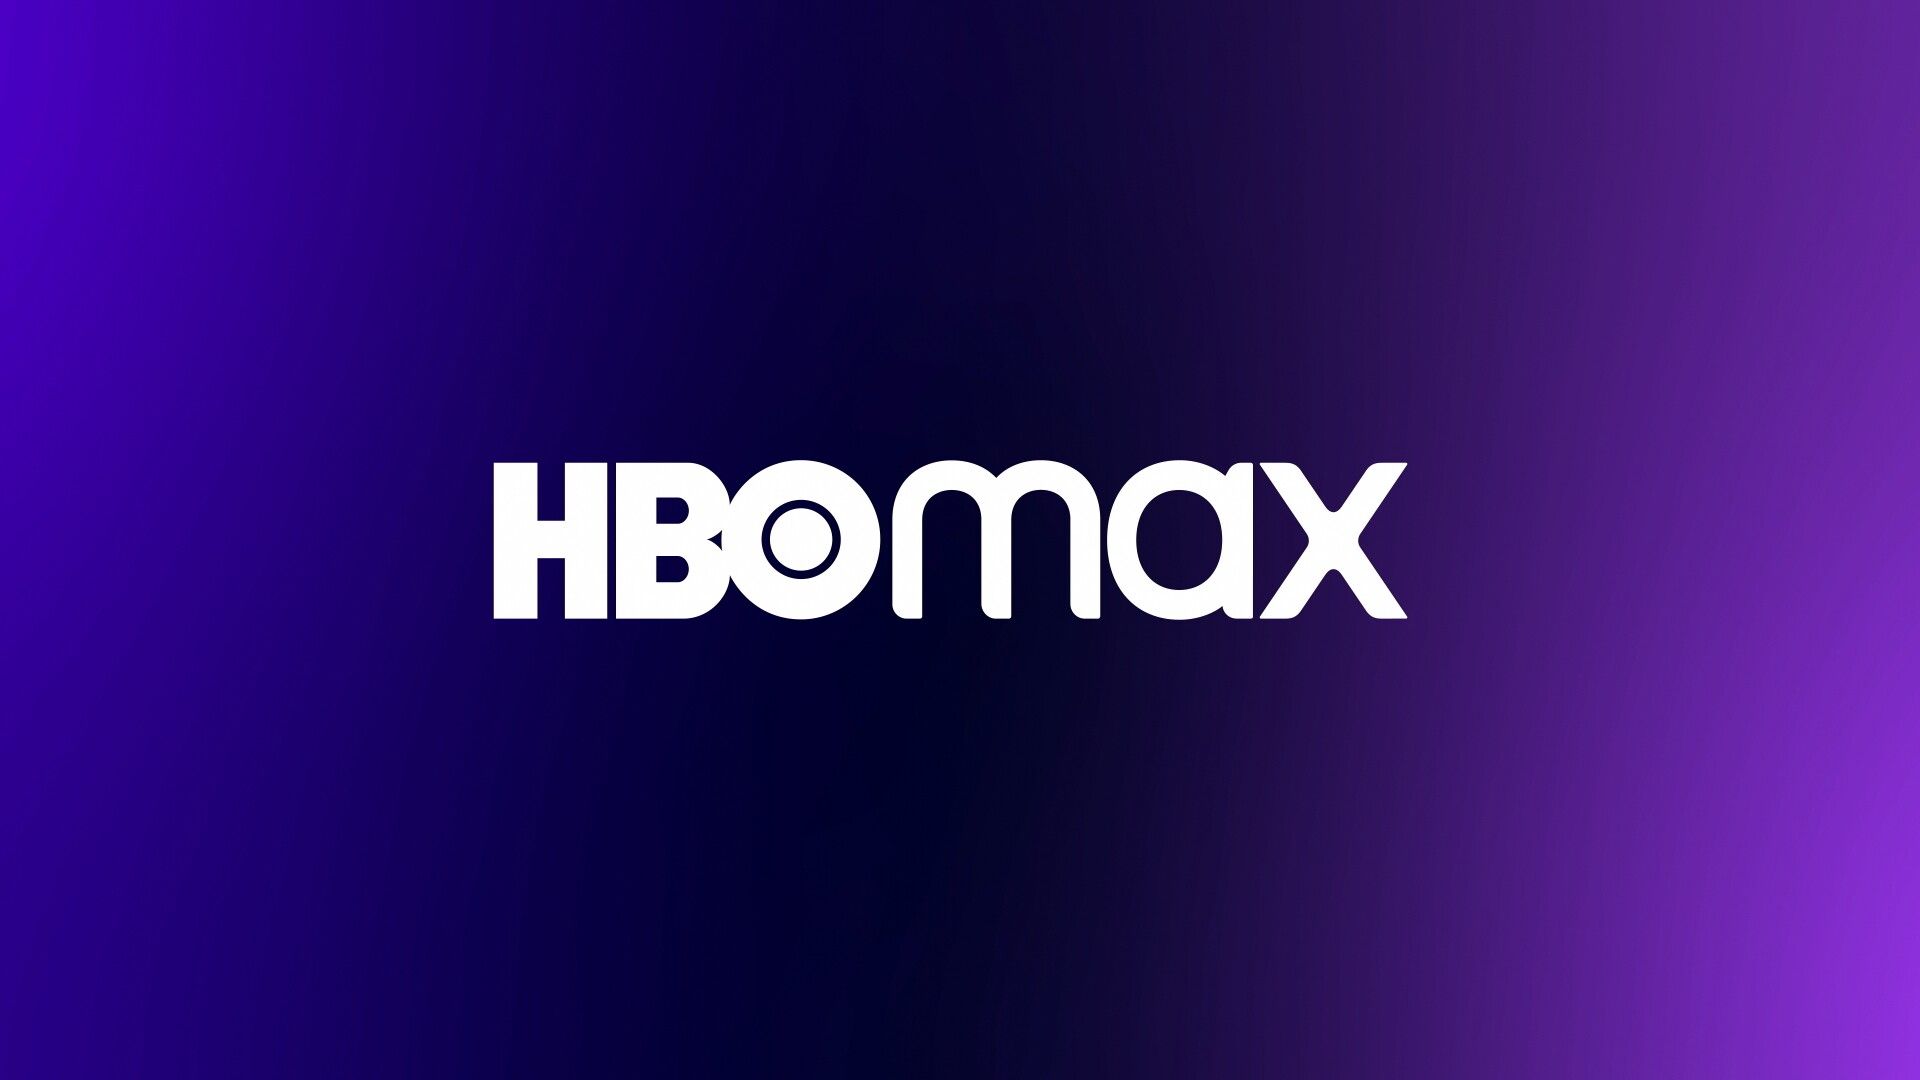 How To Get A HBO Max Free Trial